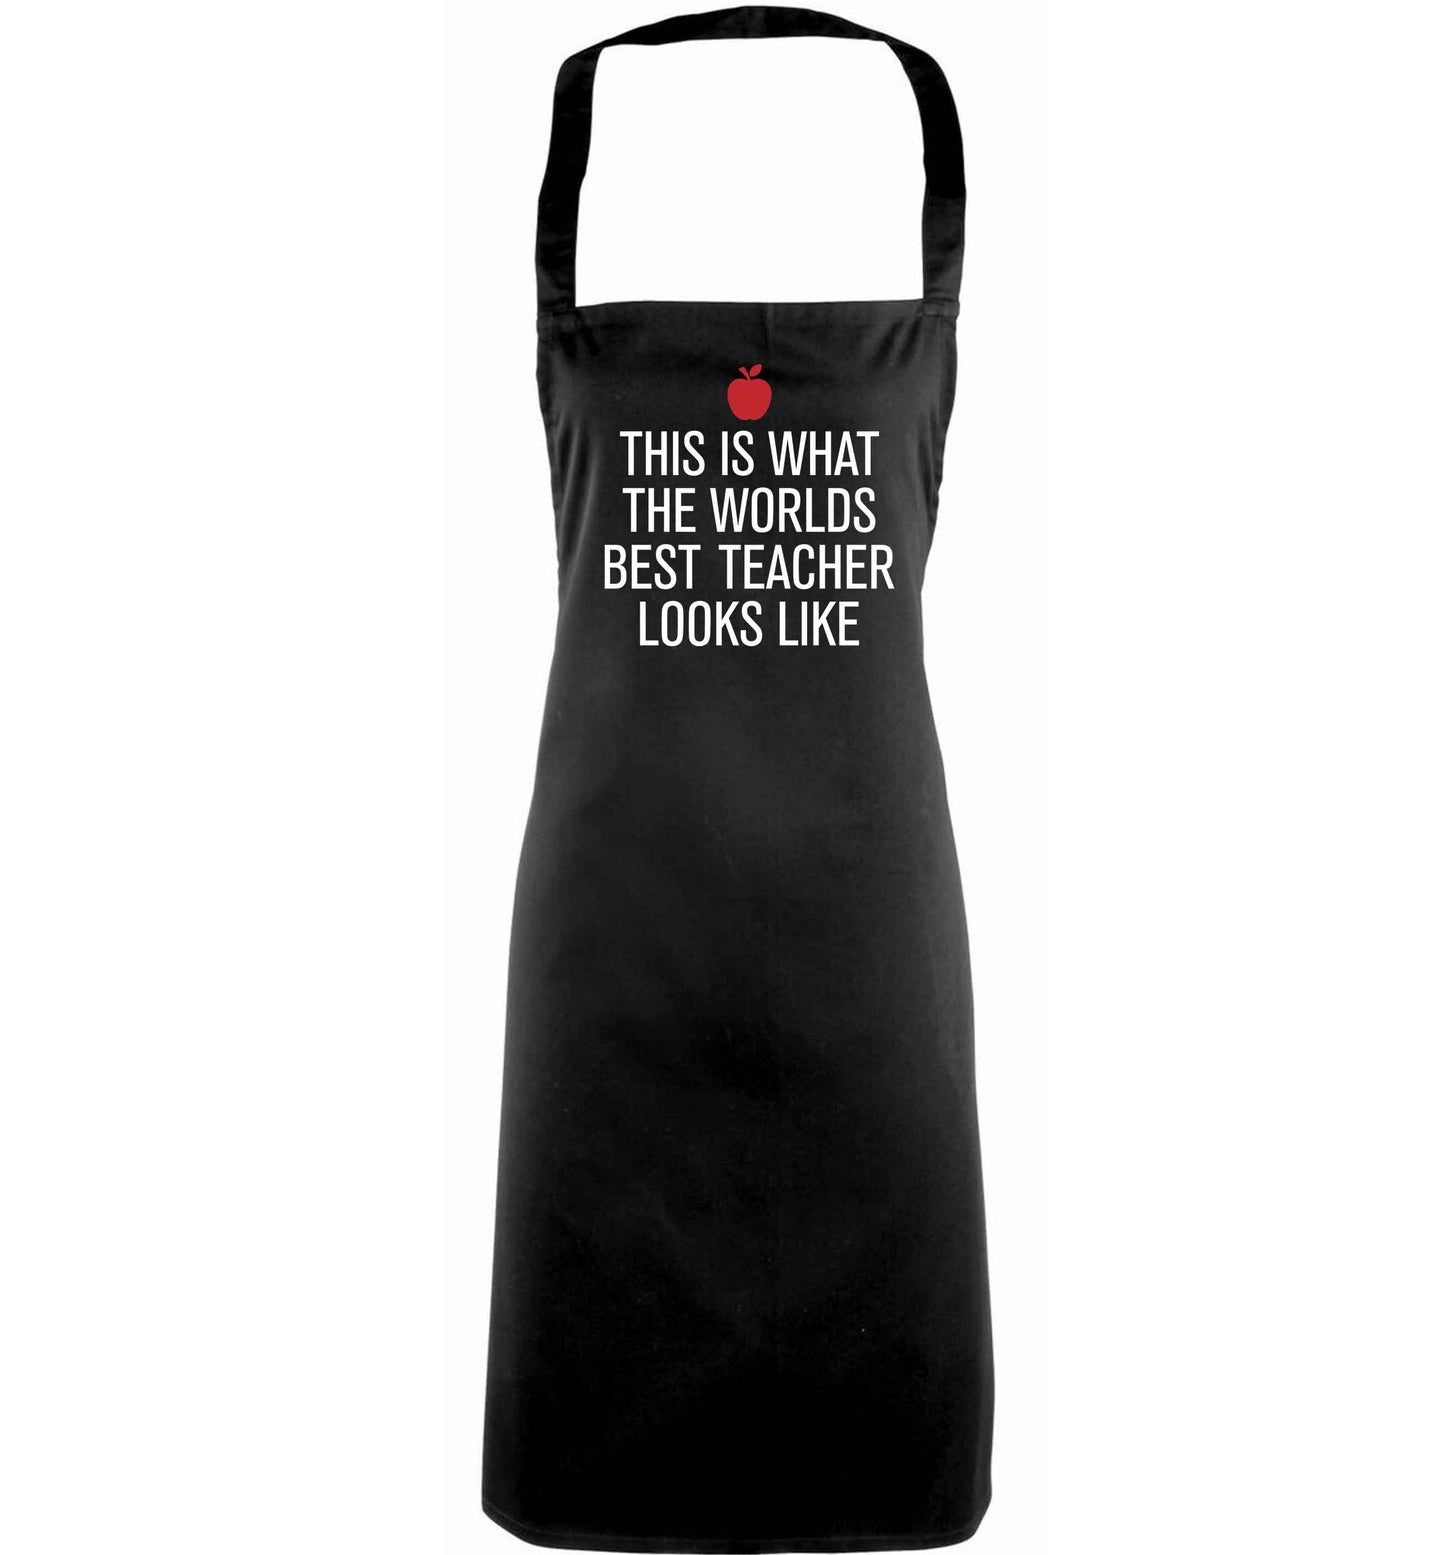 This is what the worlds best teacher looks like adults black apron